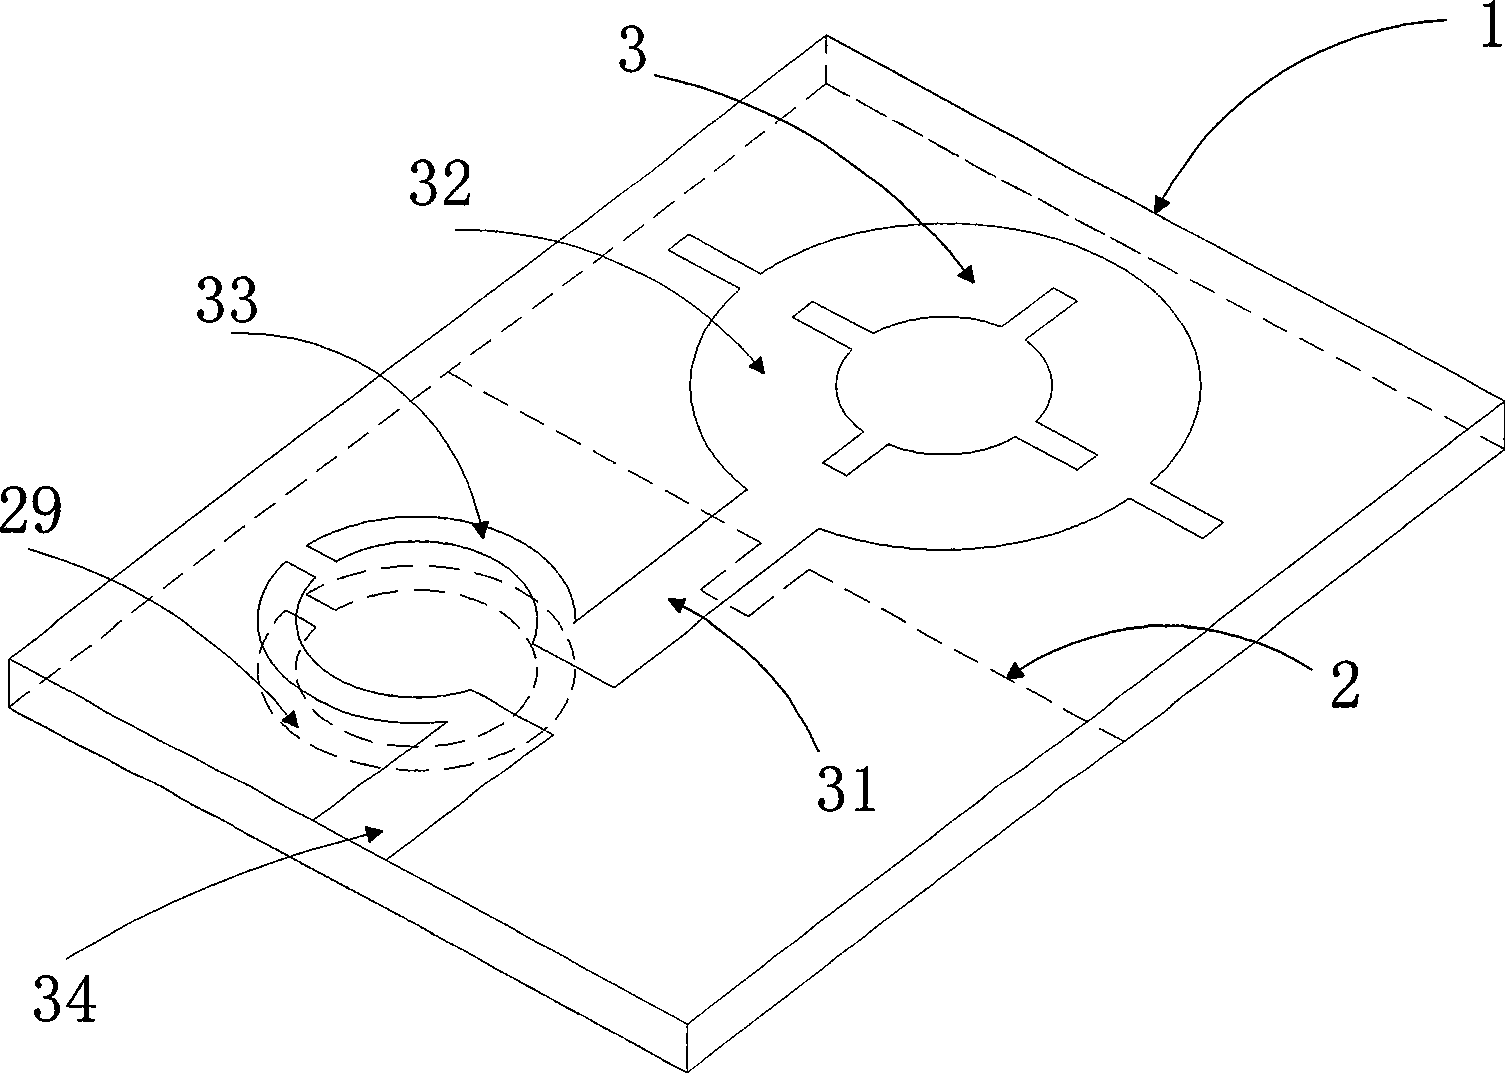 Small-sized plane wideband antenna capable of filtering